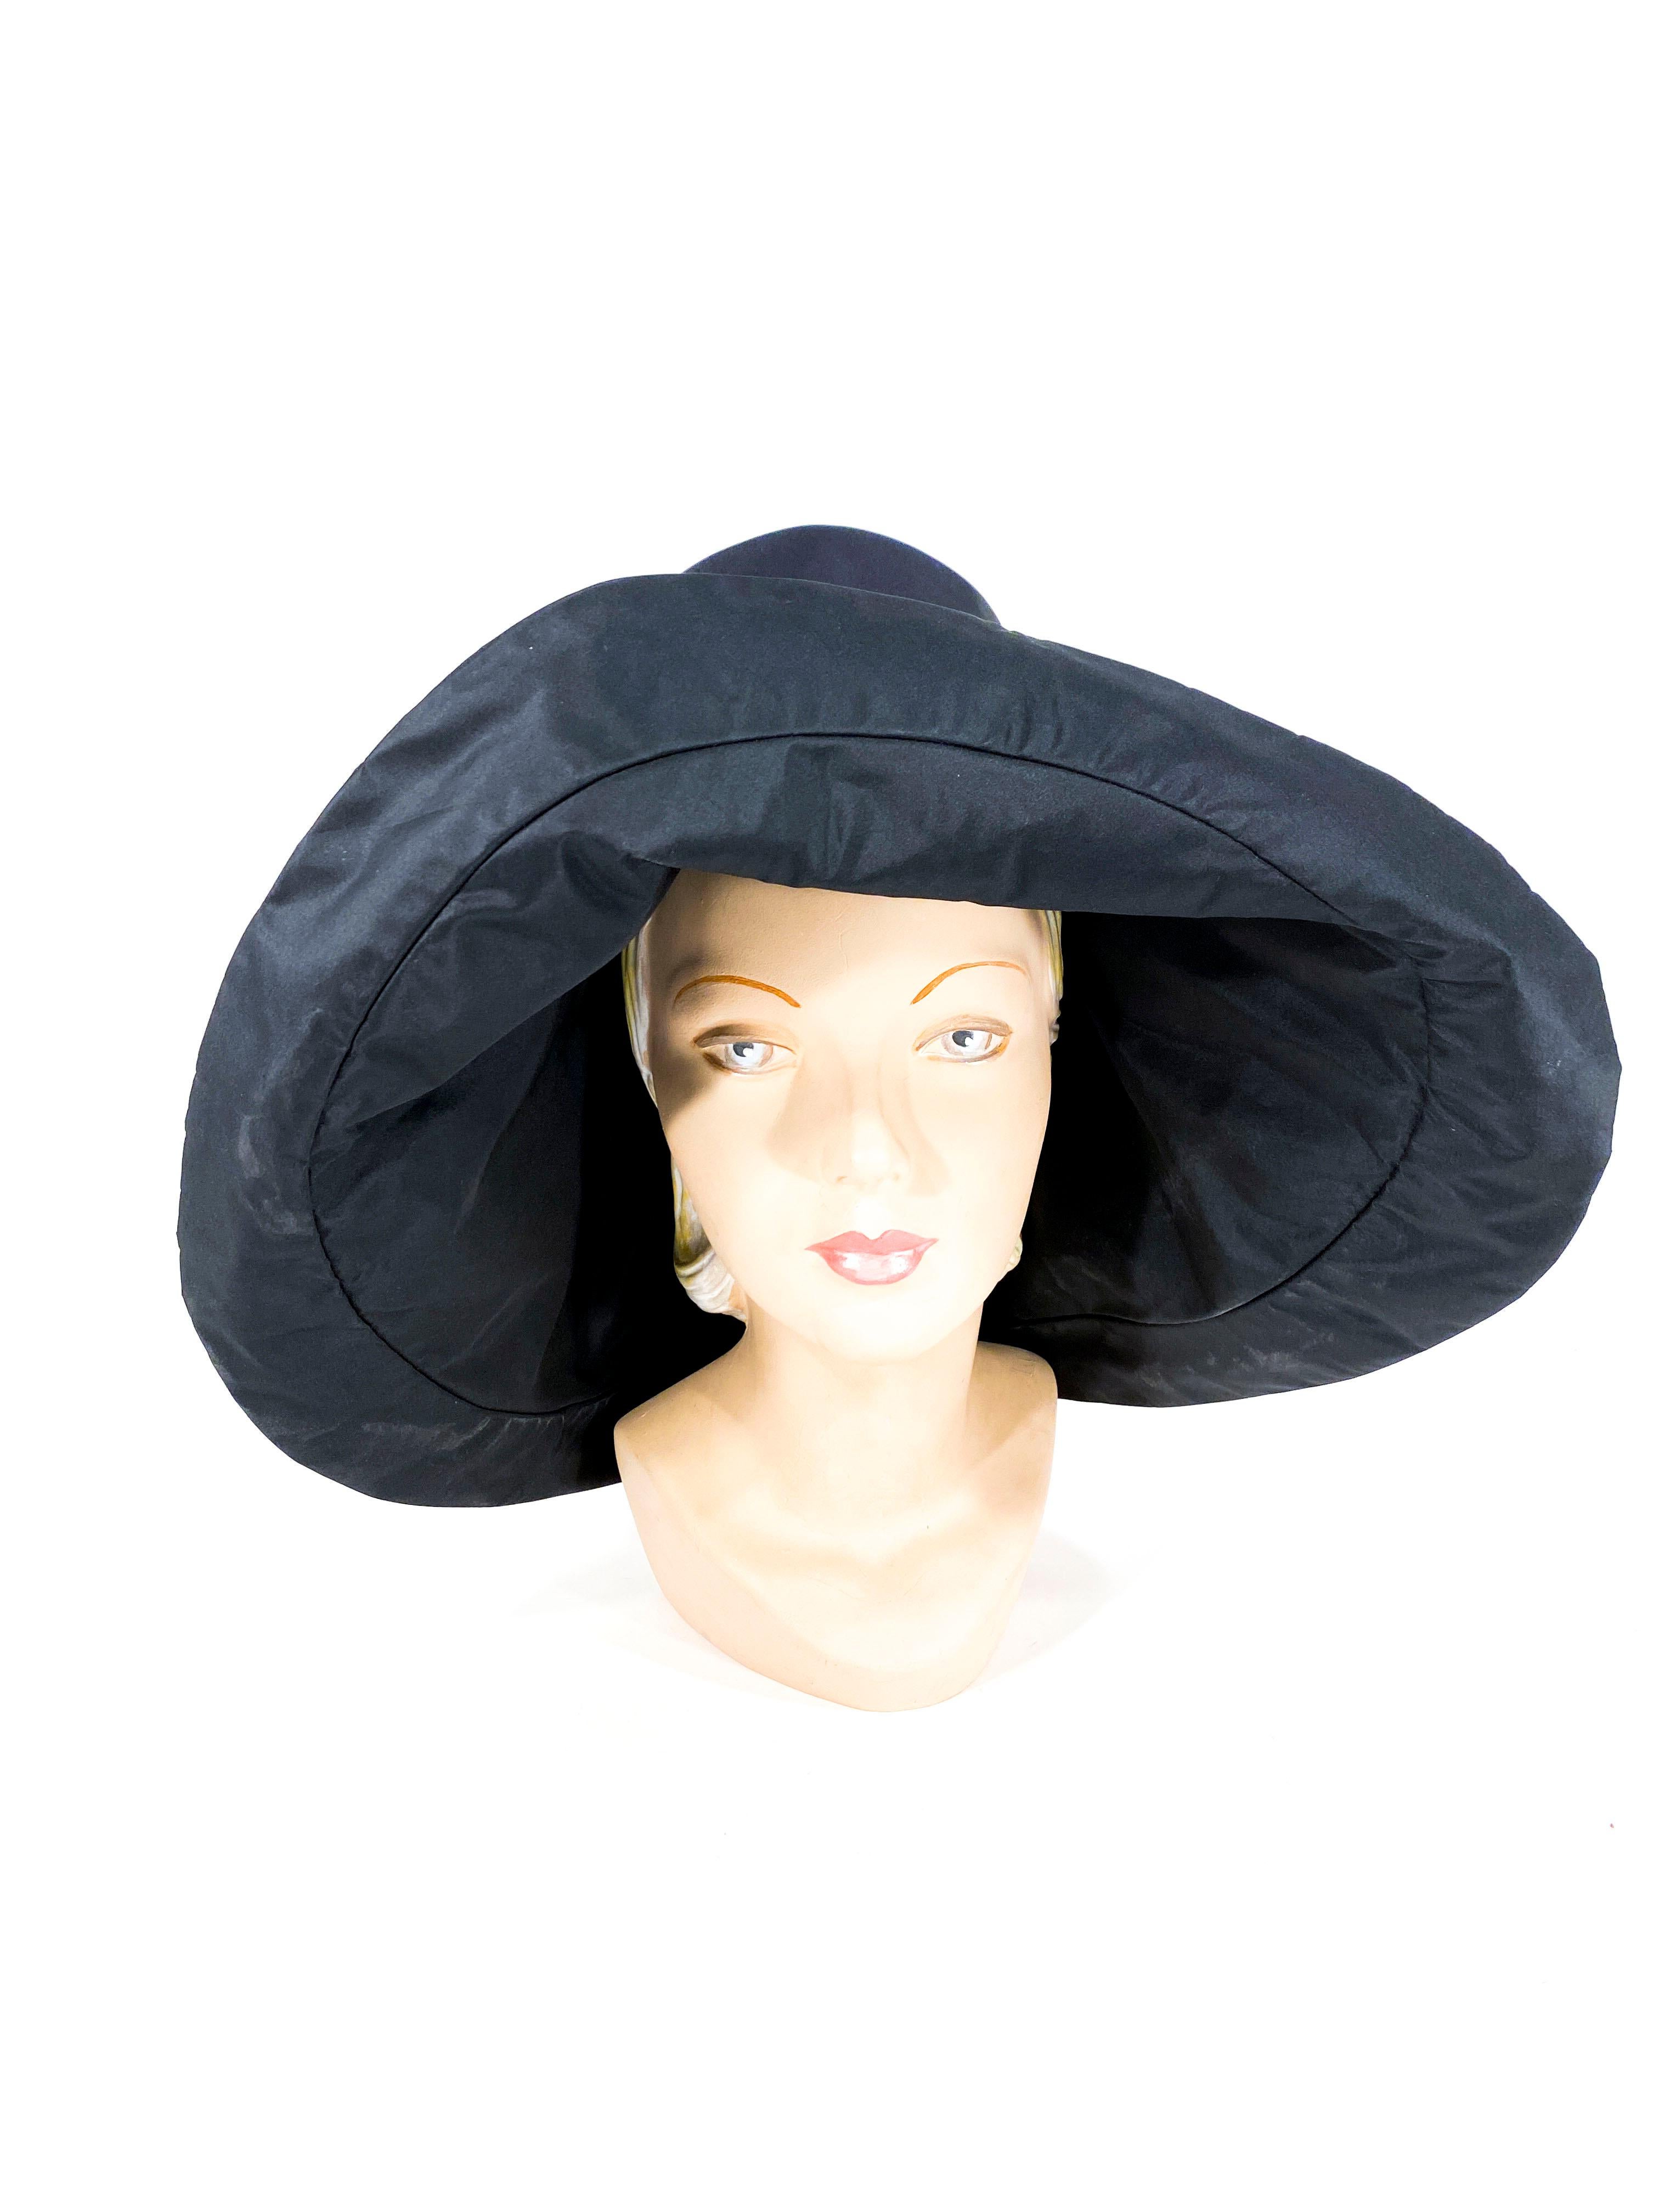 Late 1960s to early 1970s black unstructured floppy wide-brimmed day hat with a high crown, narrow grosgrain hatband, interior lining This high-fashion hat has the original Saks Fifth Ave. label on the interior hat band.